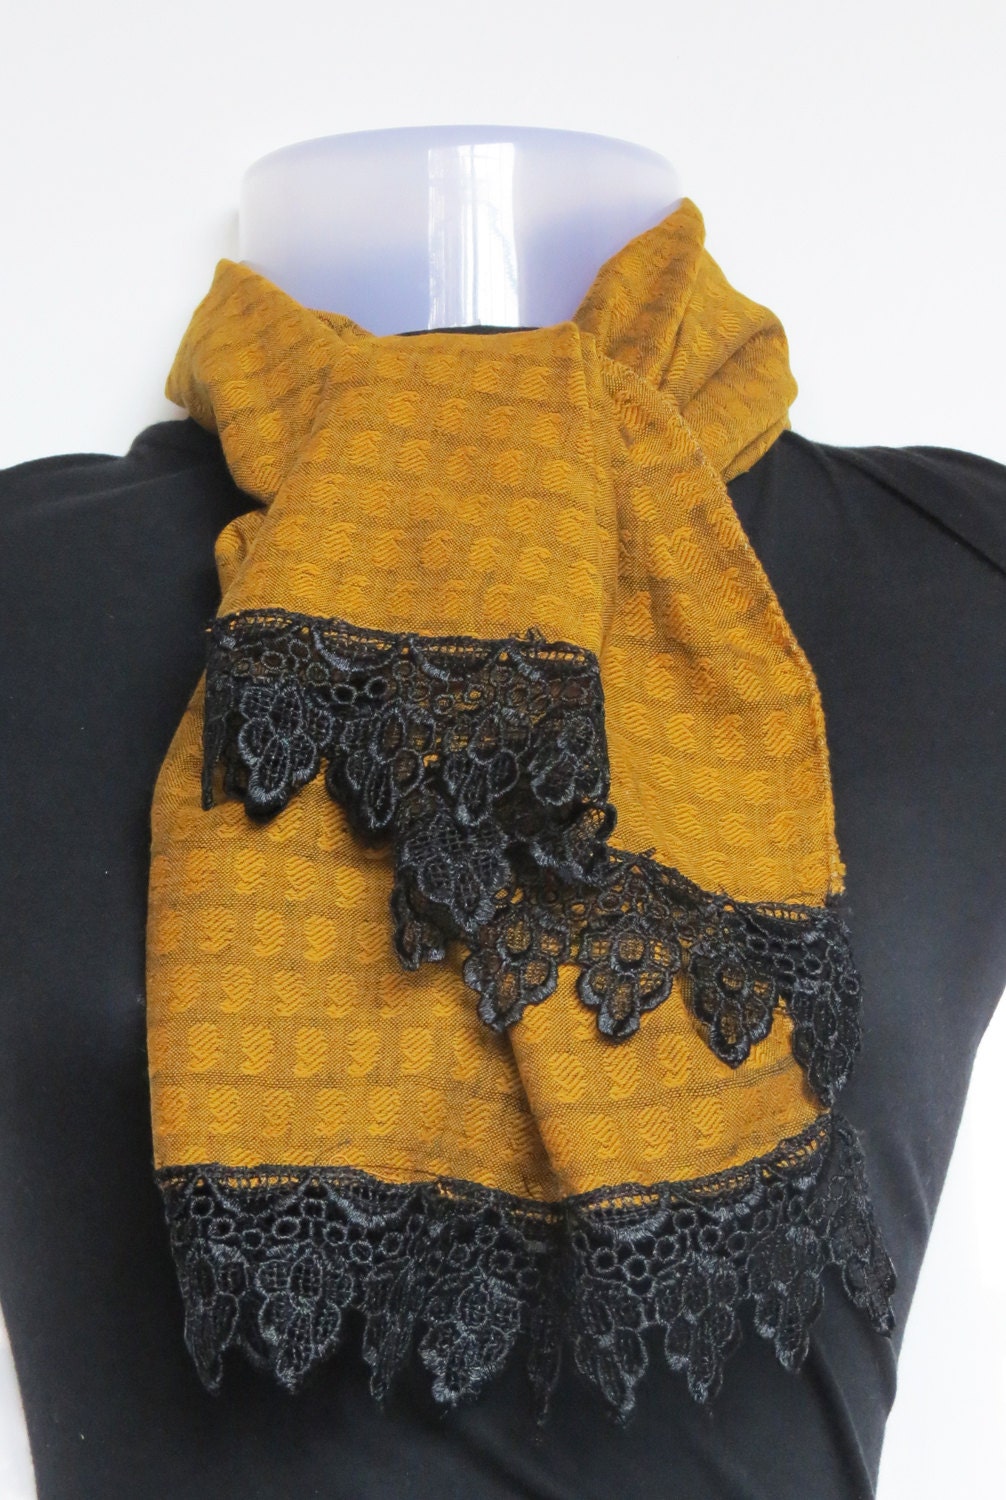 Warm Cotton & Wool Blend Scarf with Lace - Dark Mustard Yellow paisley printed with Black Lace